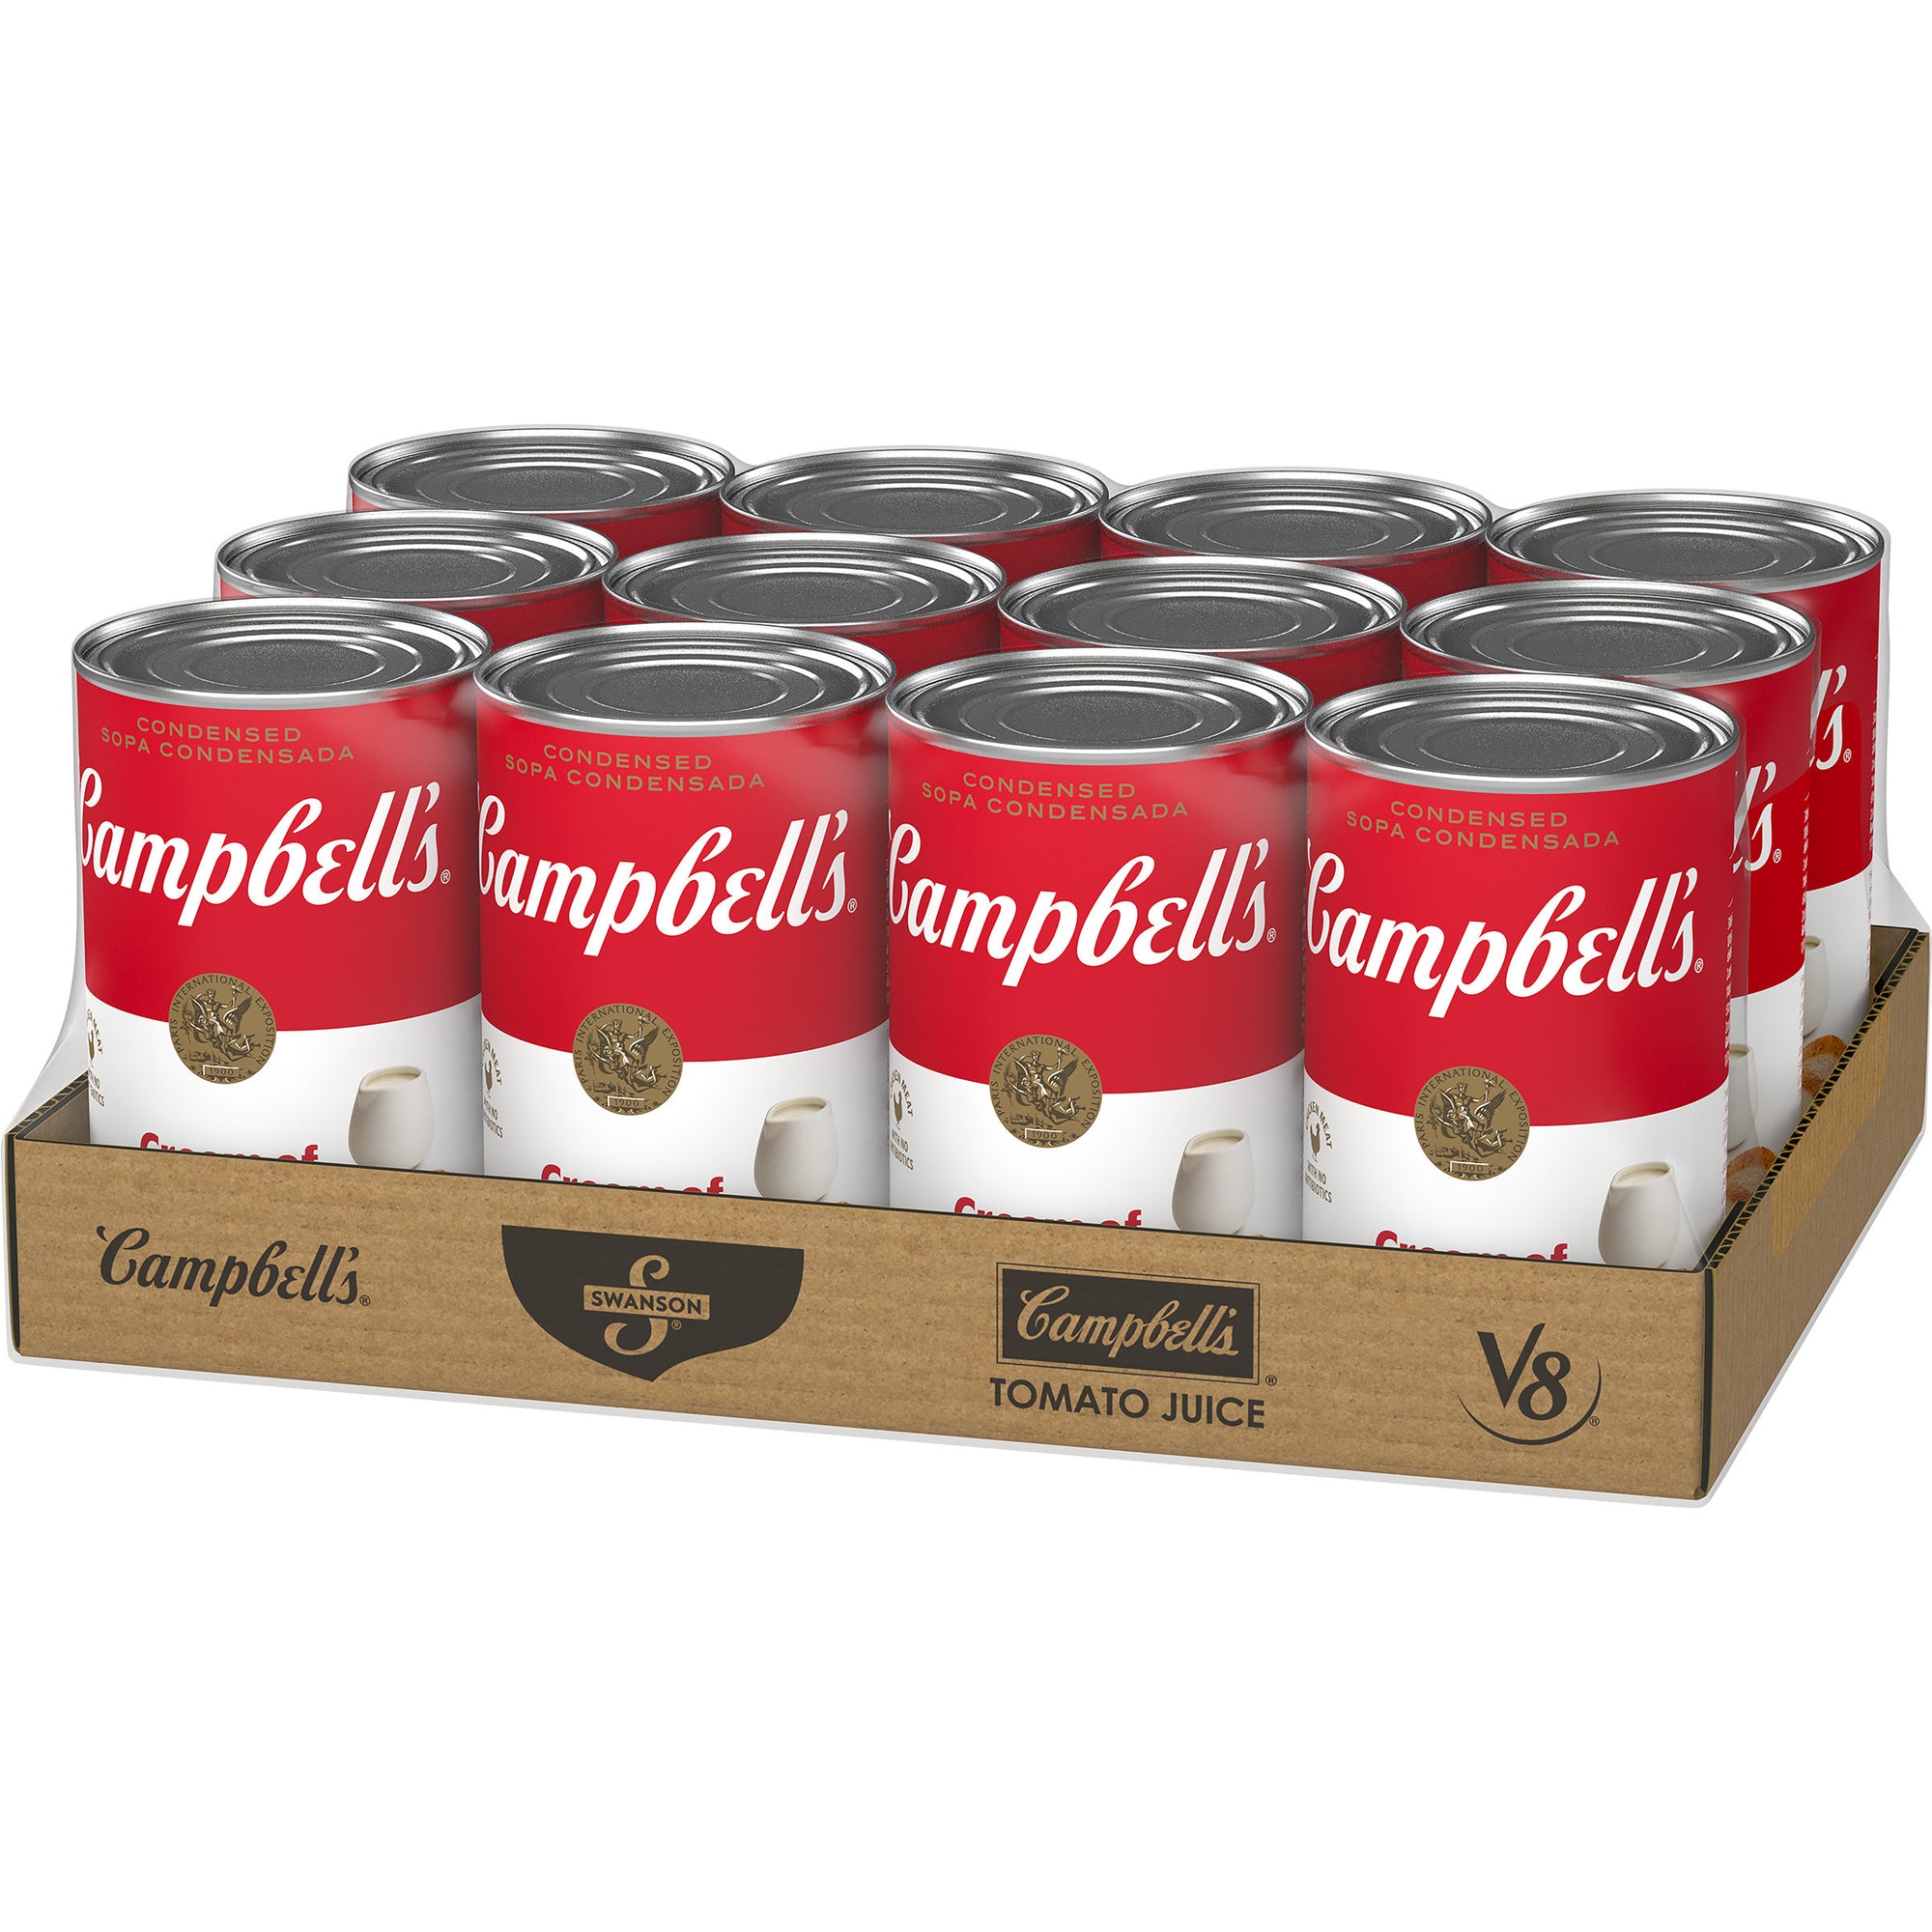 CAMPBELL'S CLASSIC CREAM OF CHICKEN CONDENSEDSHELF STABLE SOUP, 12 - 50 OZ